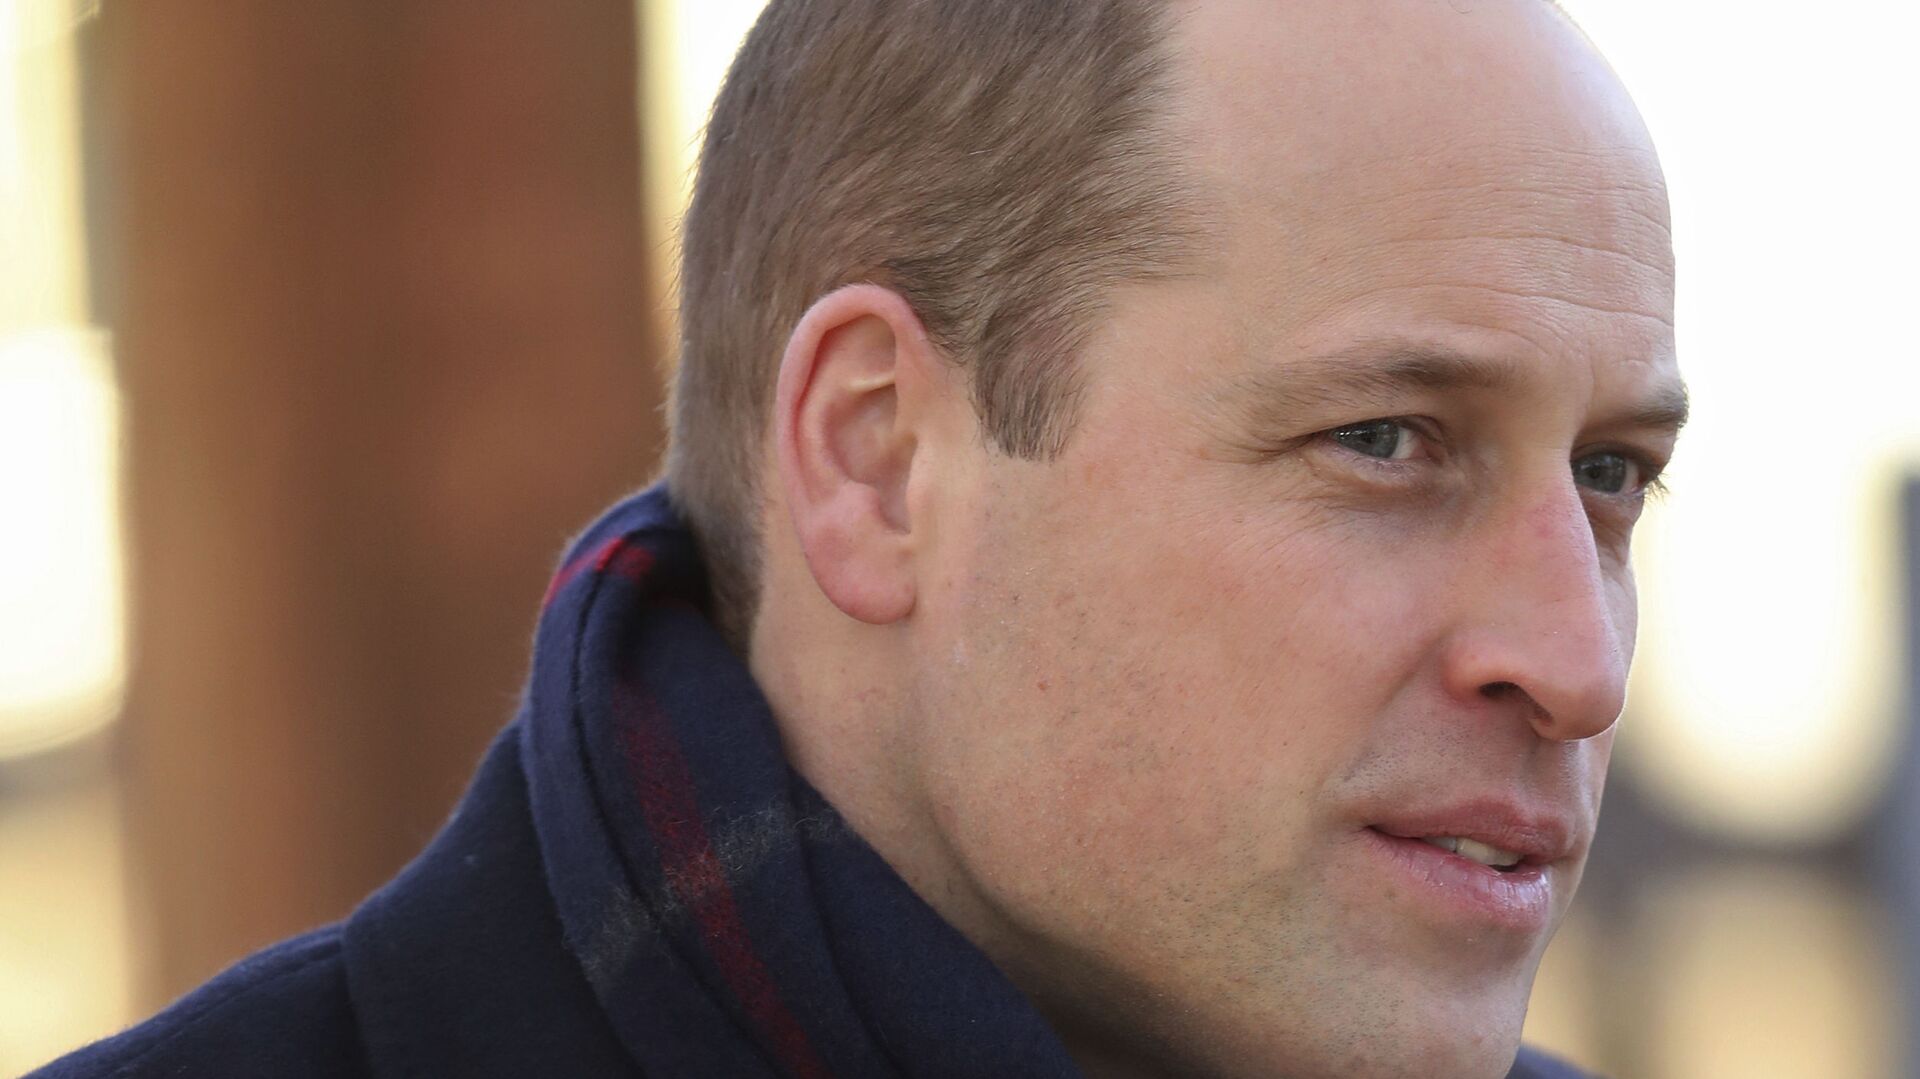 Britain's Prince William talks to members of the public at Cardiff Castle on Tuesday Dec. 8, 2020, in Cardiff, Wales - Sputnik International, 1920, 14.10.2021